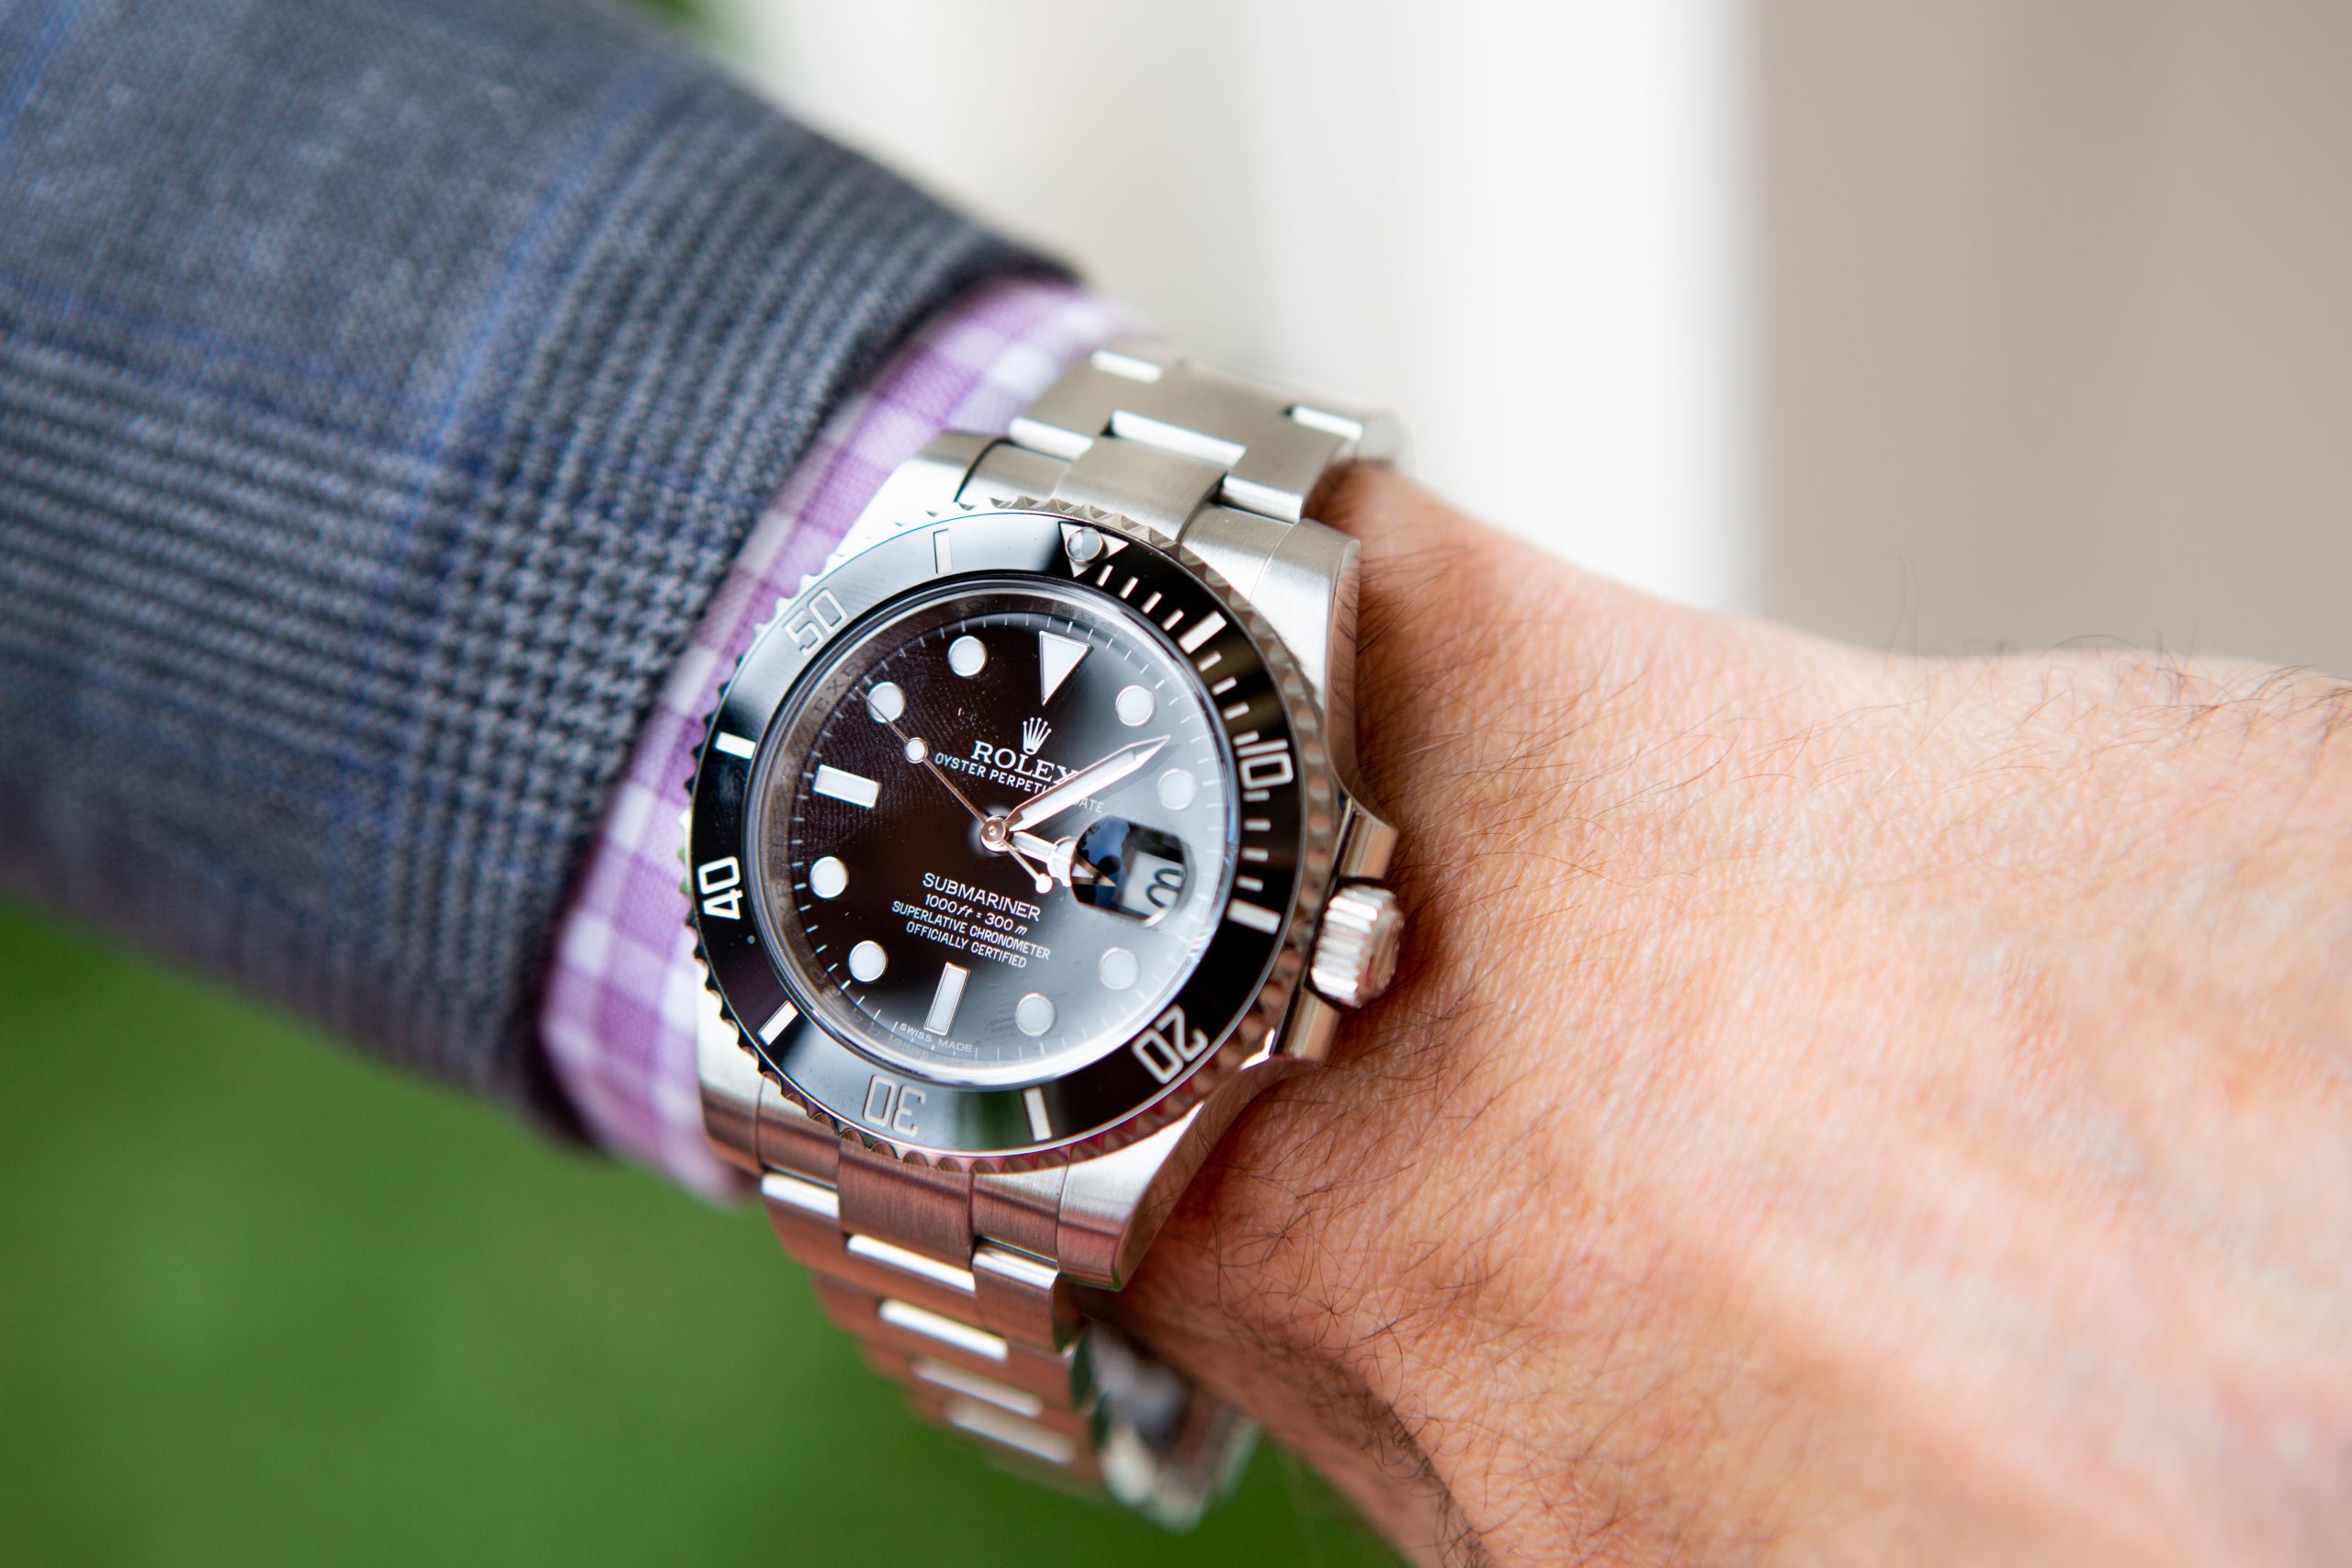 The Rolex Submariner: Everything You Need to Know